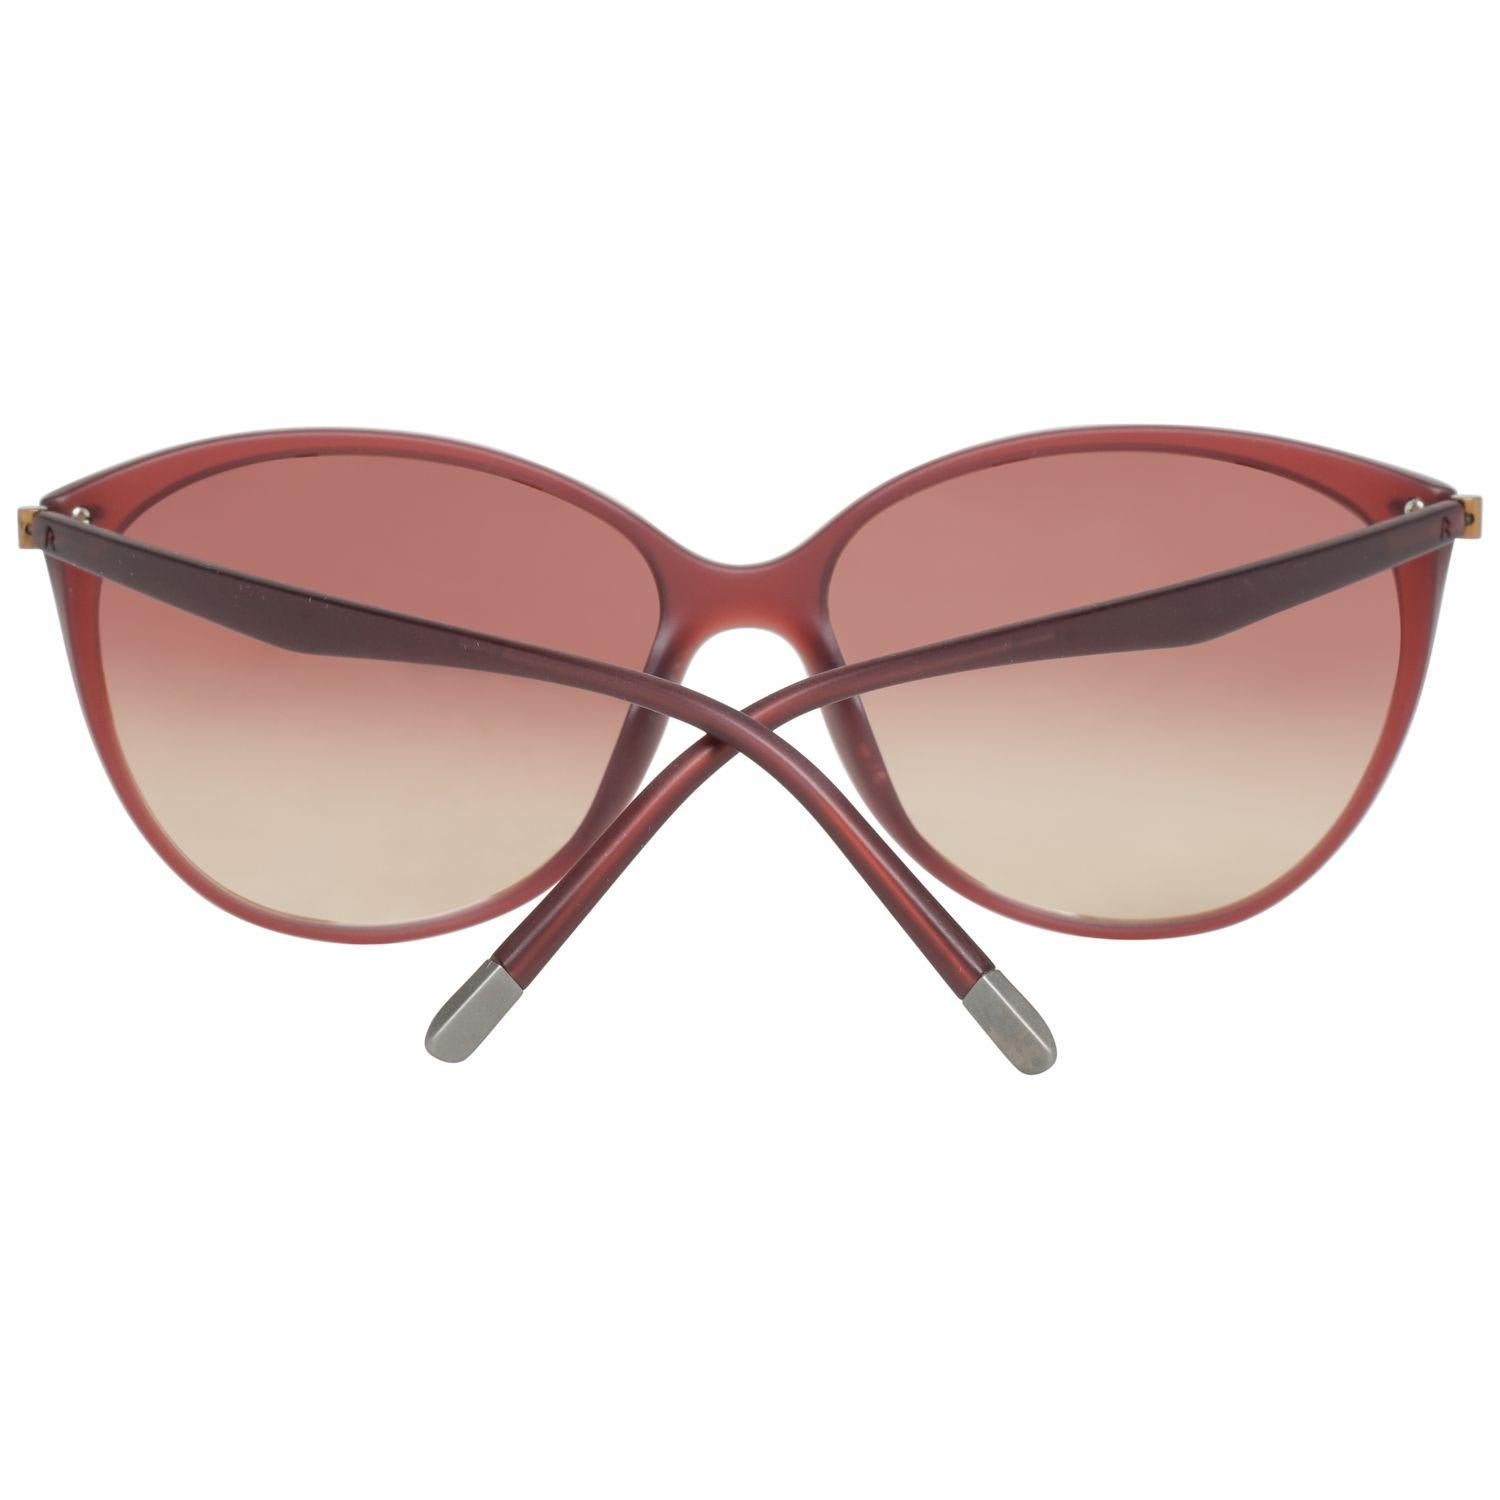 Rodenstock Mint Women Red Sunglasses , mod. R7412 C 57. Titanium frame. Gradient brown lenses. Imported.


Details

MATERIAL: Titanium

COLOR: Red

MODEL: R7412 C 57

GENDER:

COUNTRY OF MANUFACTURE: China

ORIGINAL CASE?: Yes

STYLE: Oval

LENS